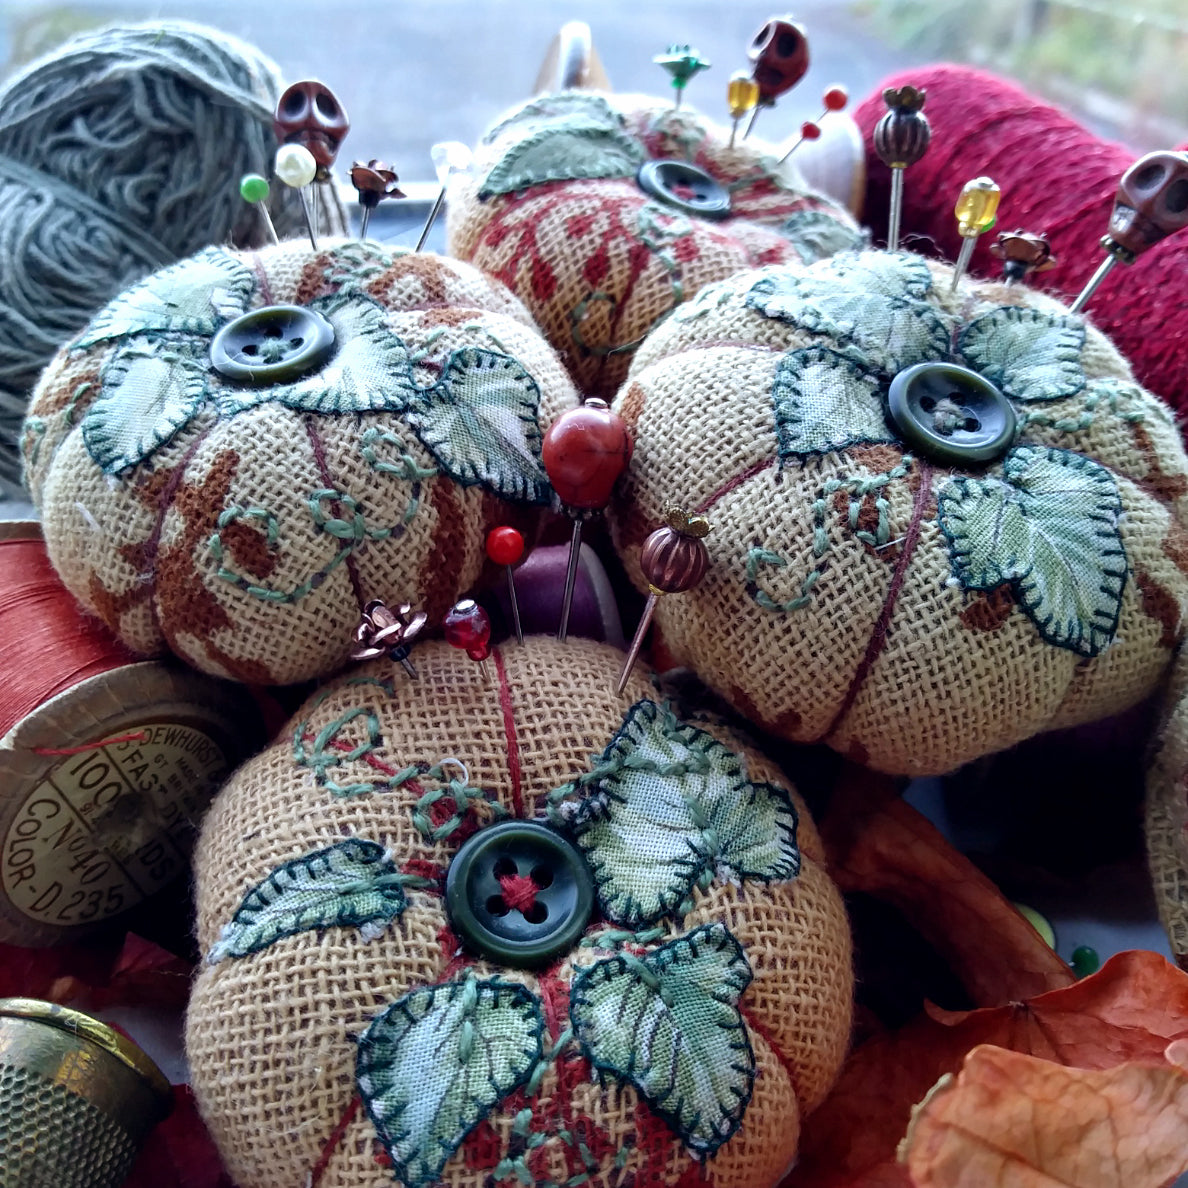 Pumpkin pincushions with spools and autumn leaves